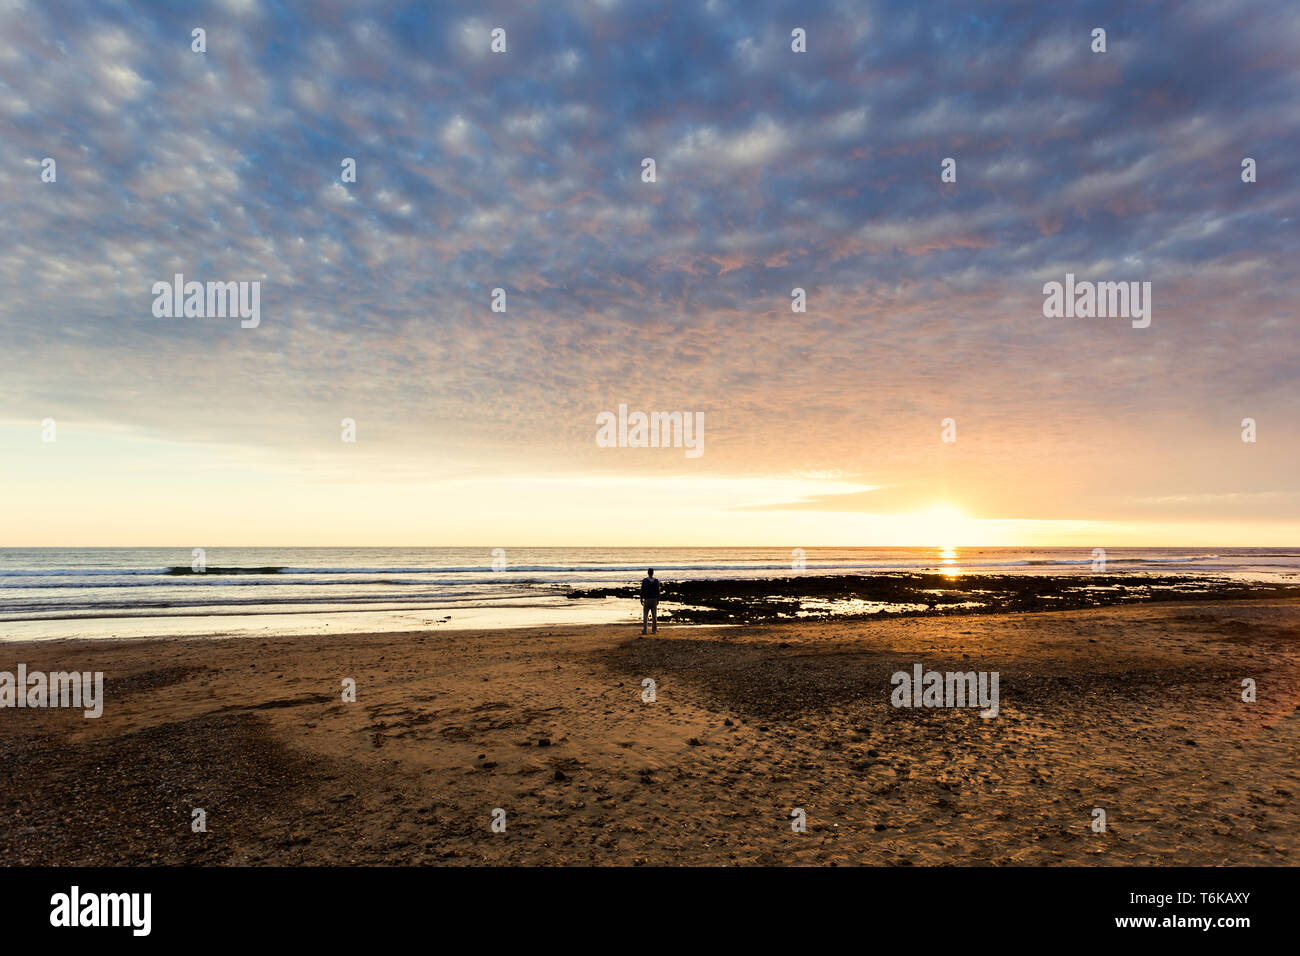 A man is watching a beautiful sunset over the mediterranean sea while standing near the shore, Chipiona, Cádiz, Spain Stock Photo